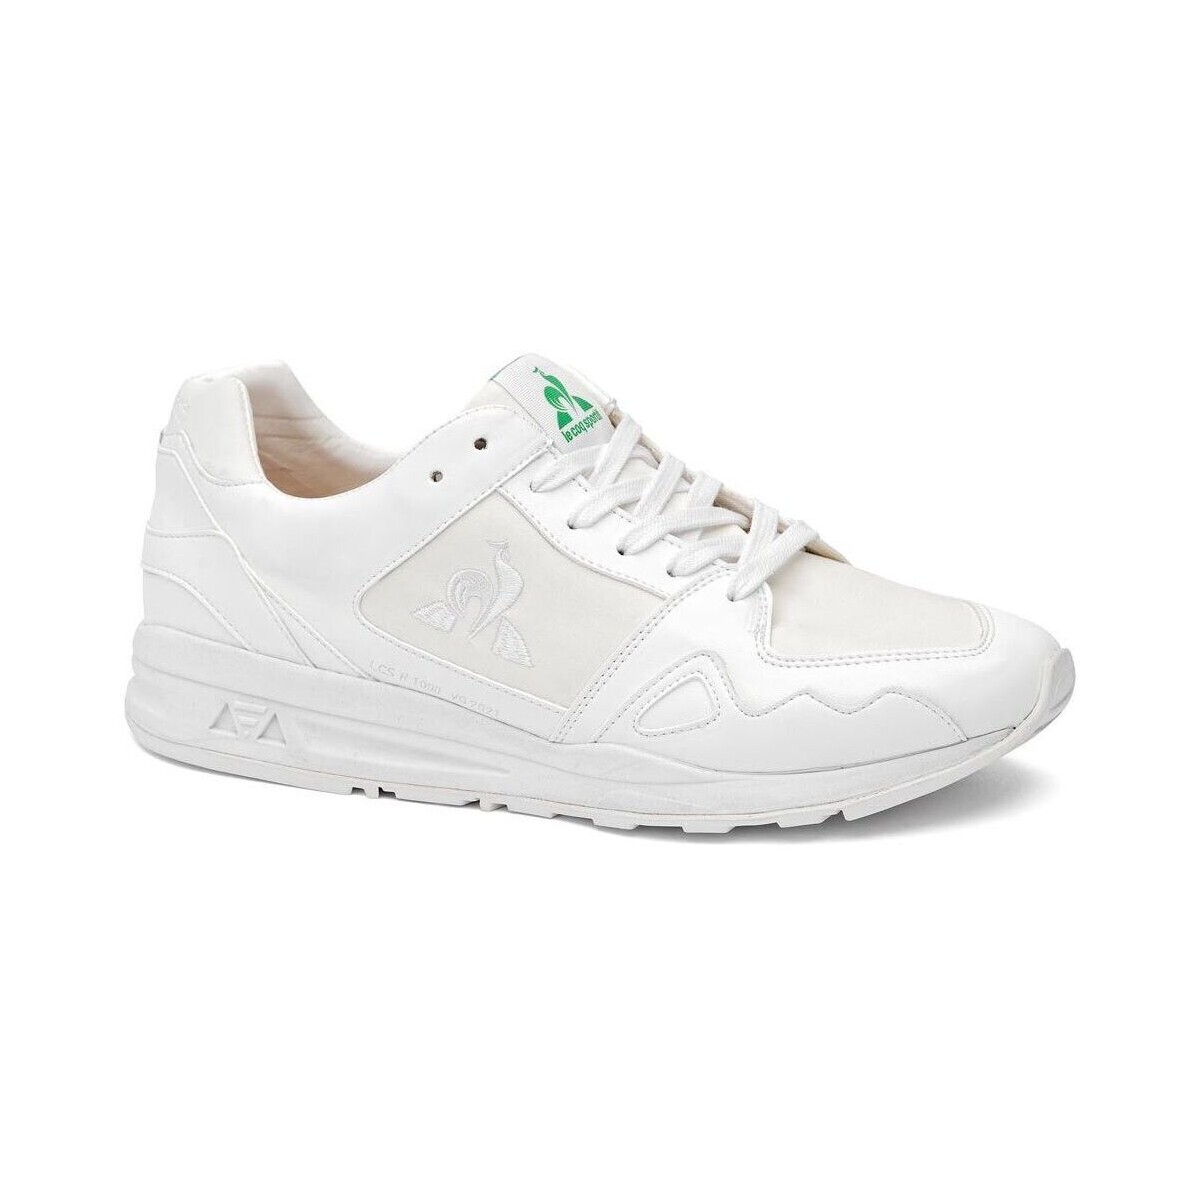 Sneakers Le Coq Sportif Lcs r1000 LCS R1000 OPTICAL WHITE